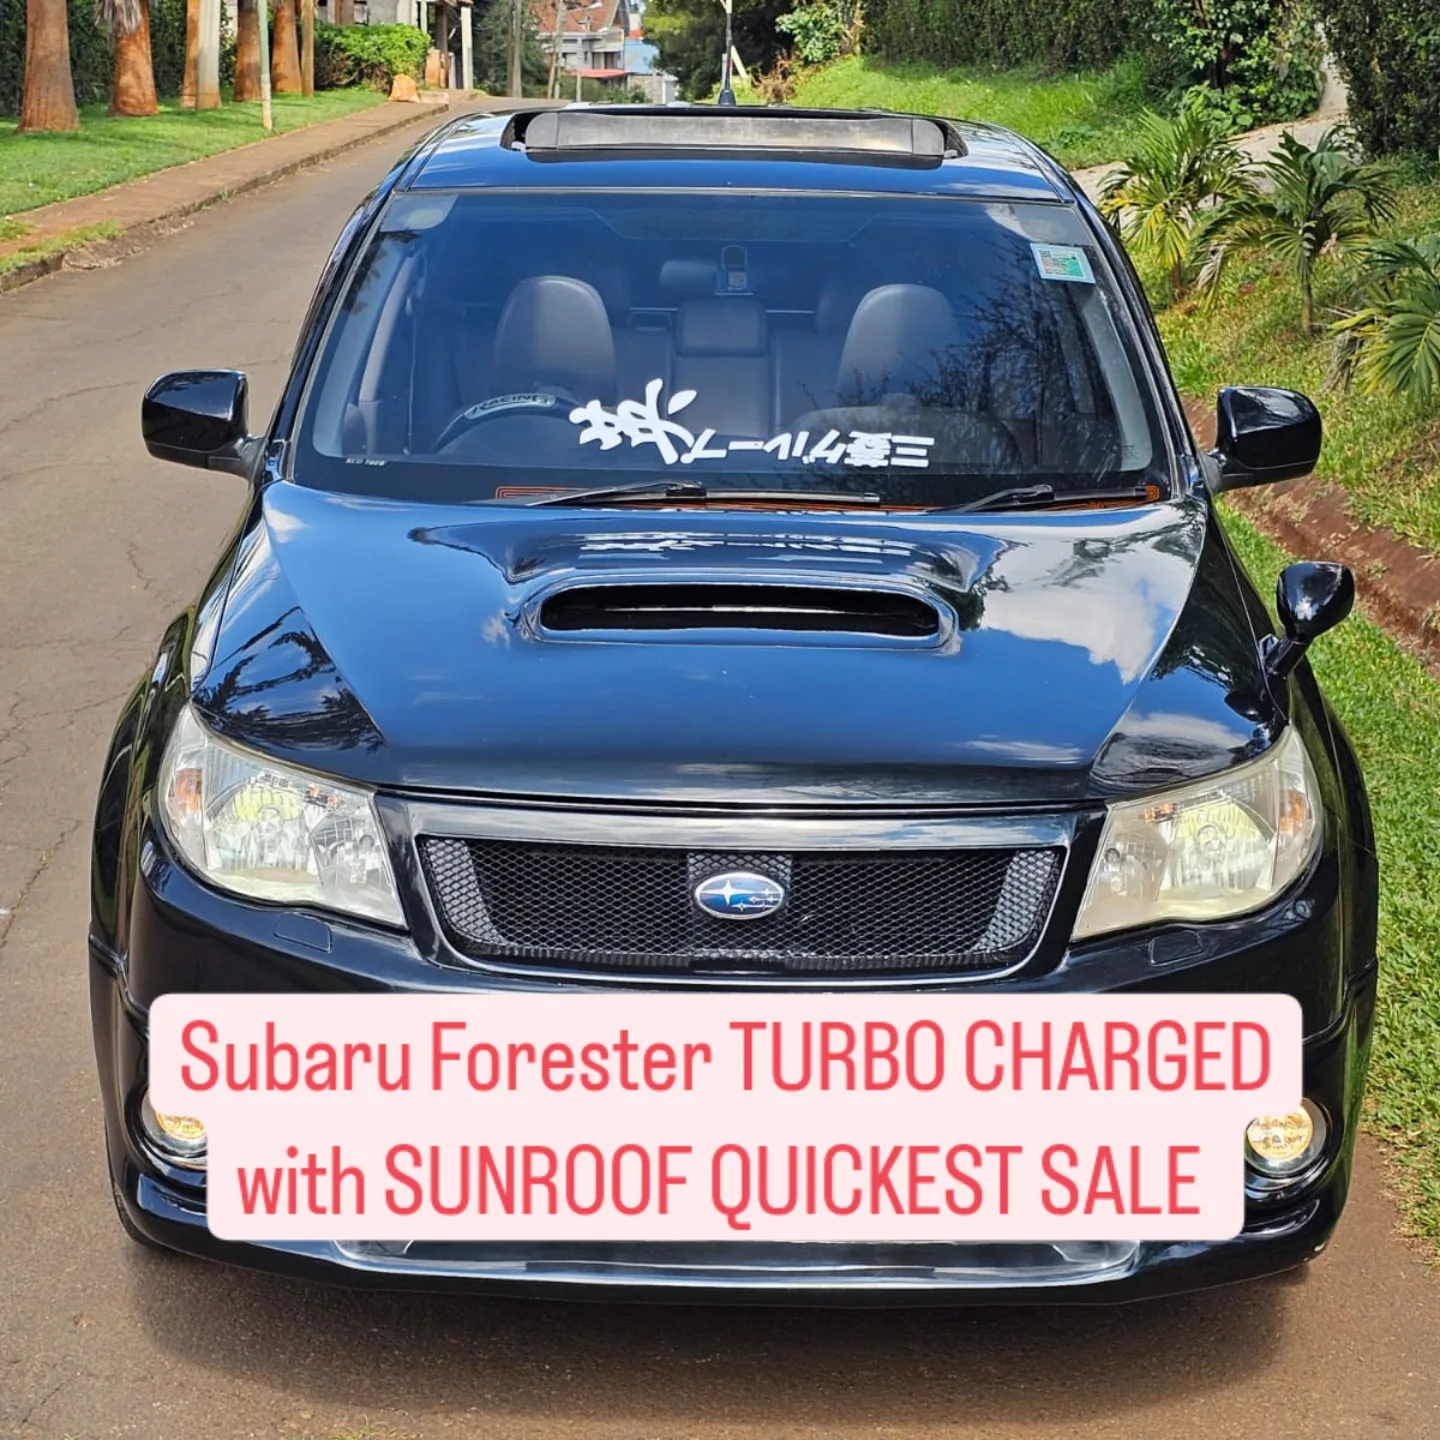 Cars For Sale in Kenya Car/motor vehicle-Subaru Forester TURBO CHARGED with sunroof SH-5You Pay 30% deposit Trade in Ok EXCLUSIVE Hire purchase 9